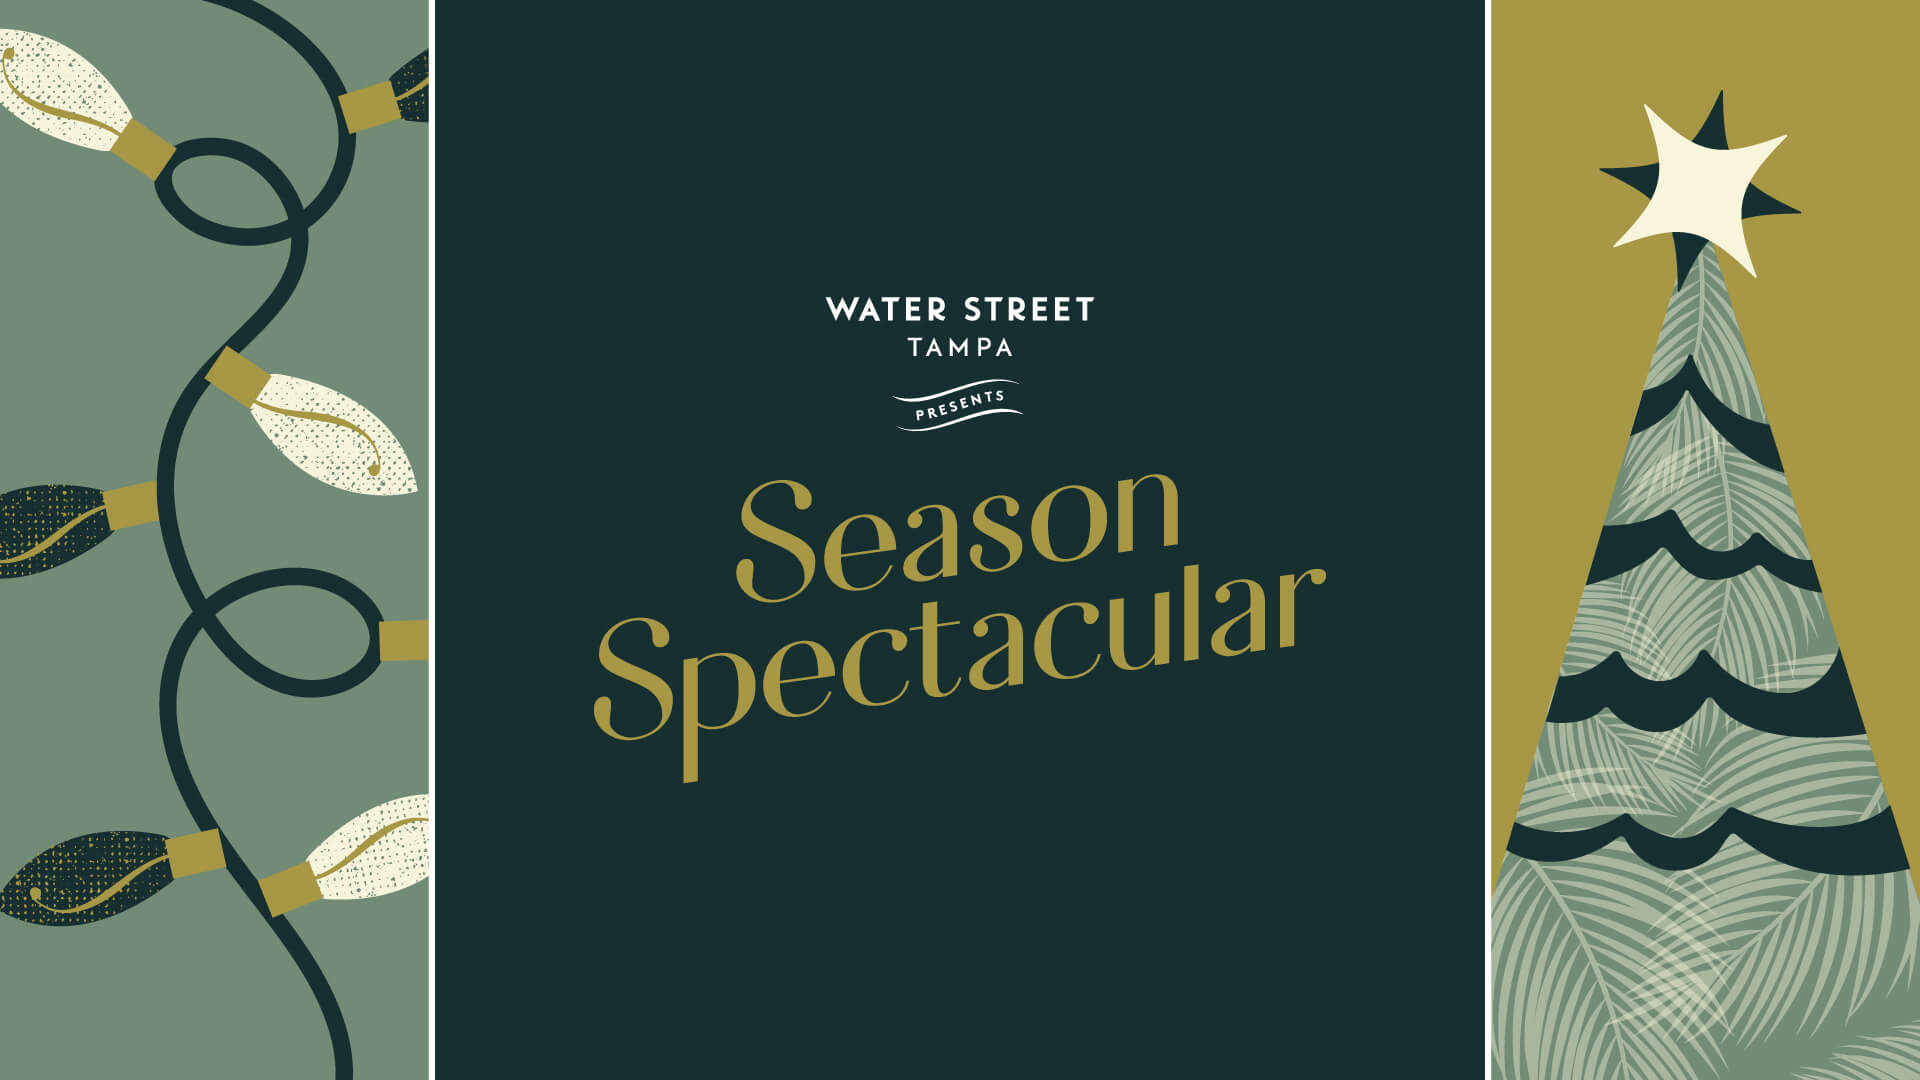 A graphical presentation of Season Spectacular